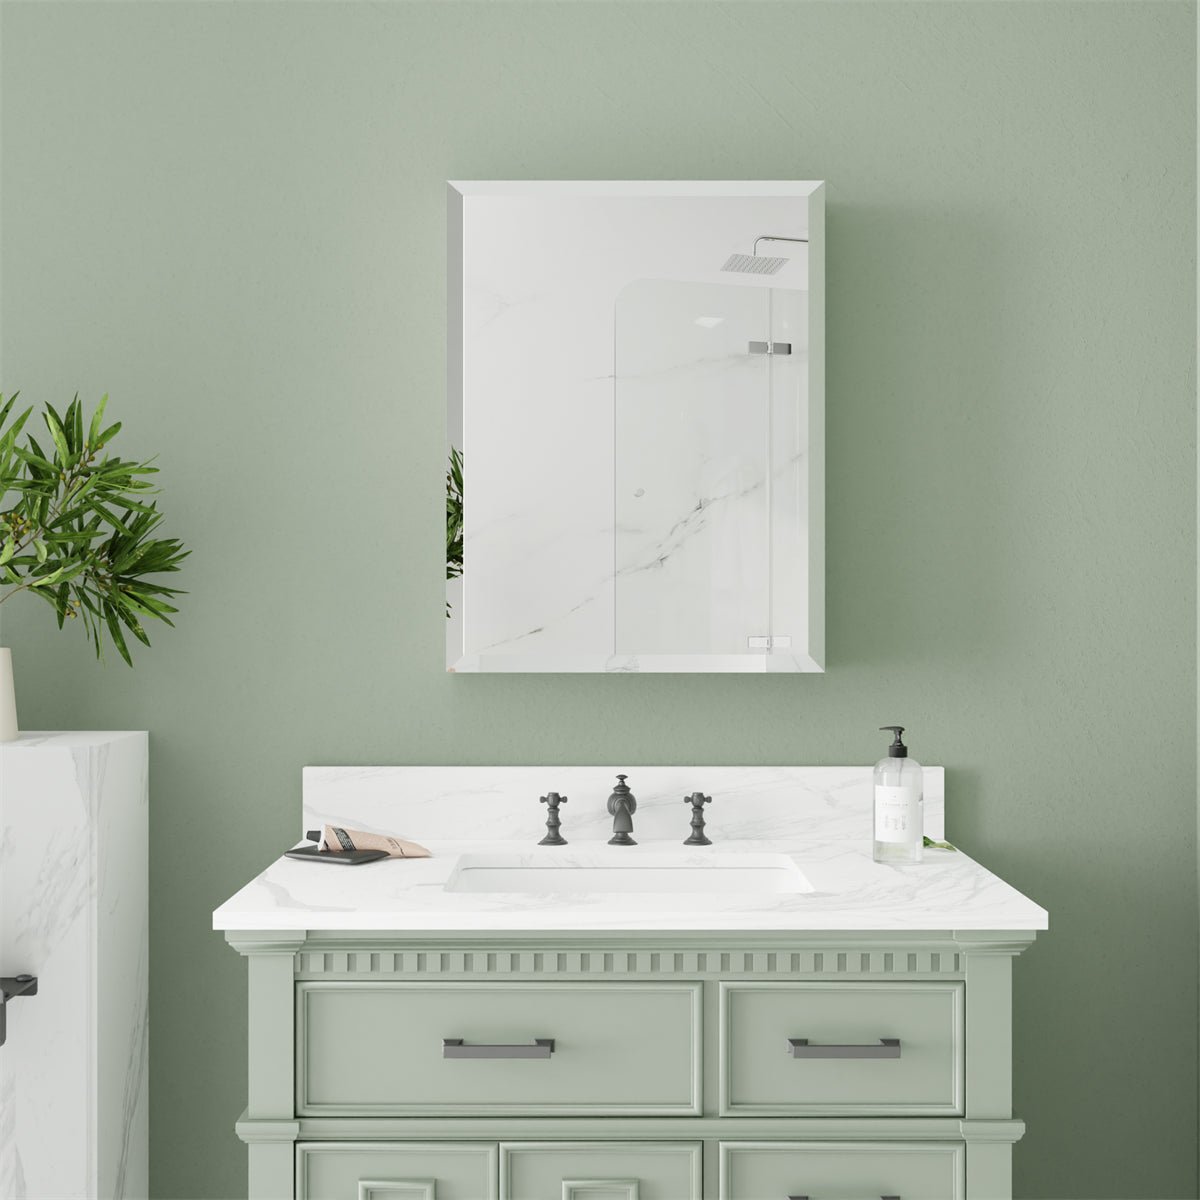 Classic 20"x26" Matted Black medicine cabinet with Mirror Bathroom Surface Mount - ExBriteUSA